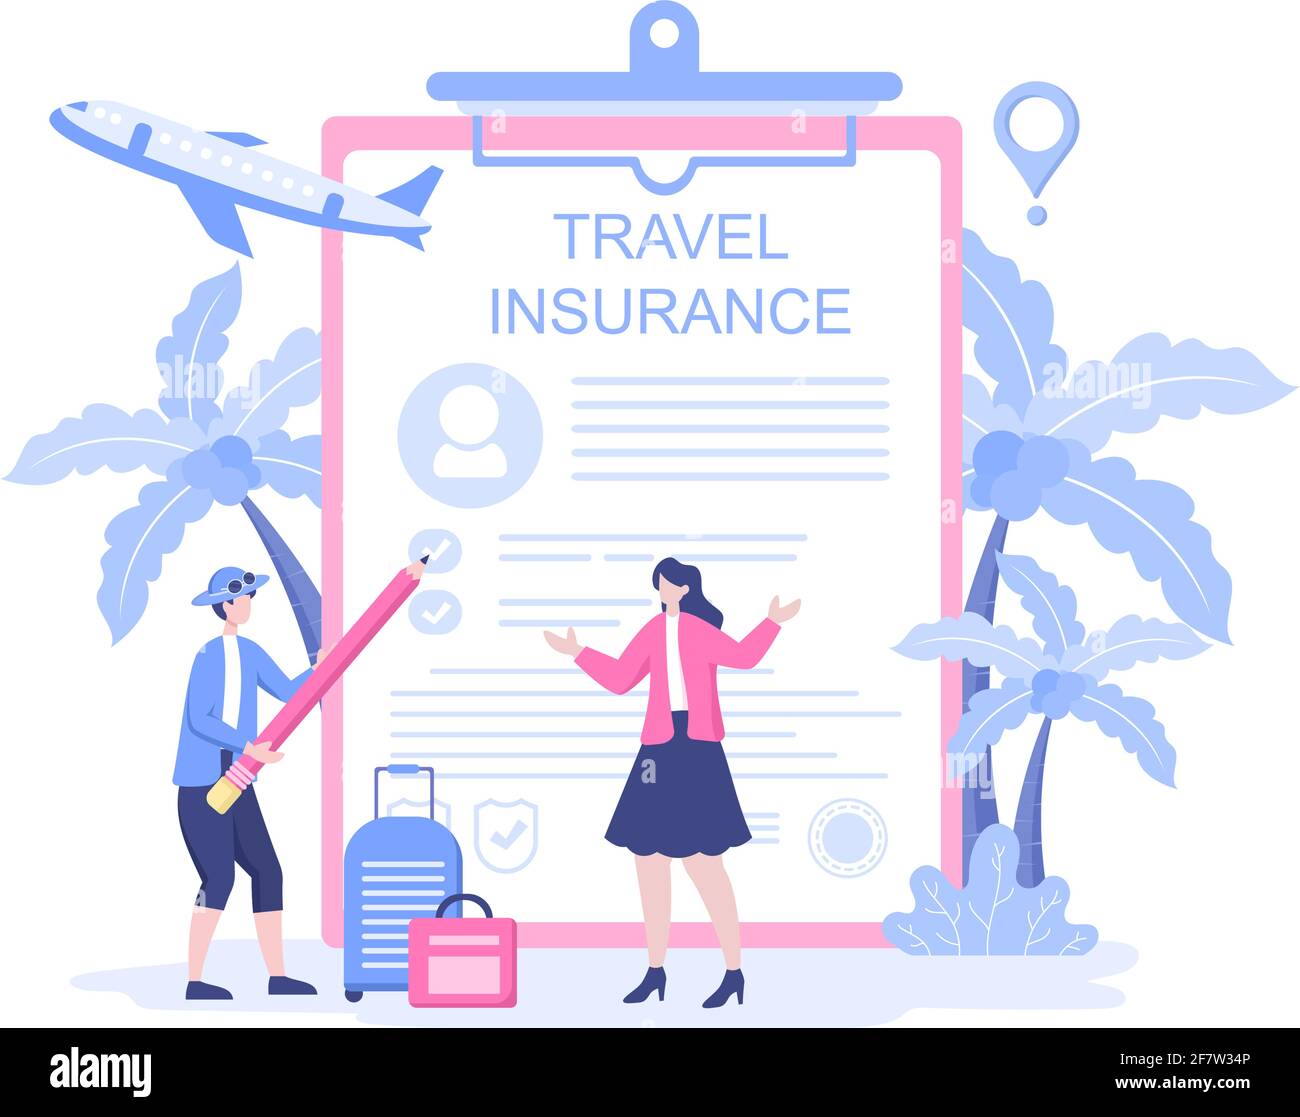 Travel and Tour Insurance Concept for Accidents, Protect Health, Emergency Risks While On Vacation. Vector Flat Design Illustration Stock Vector